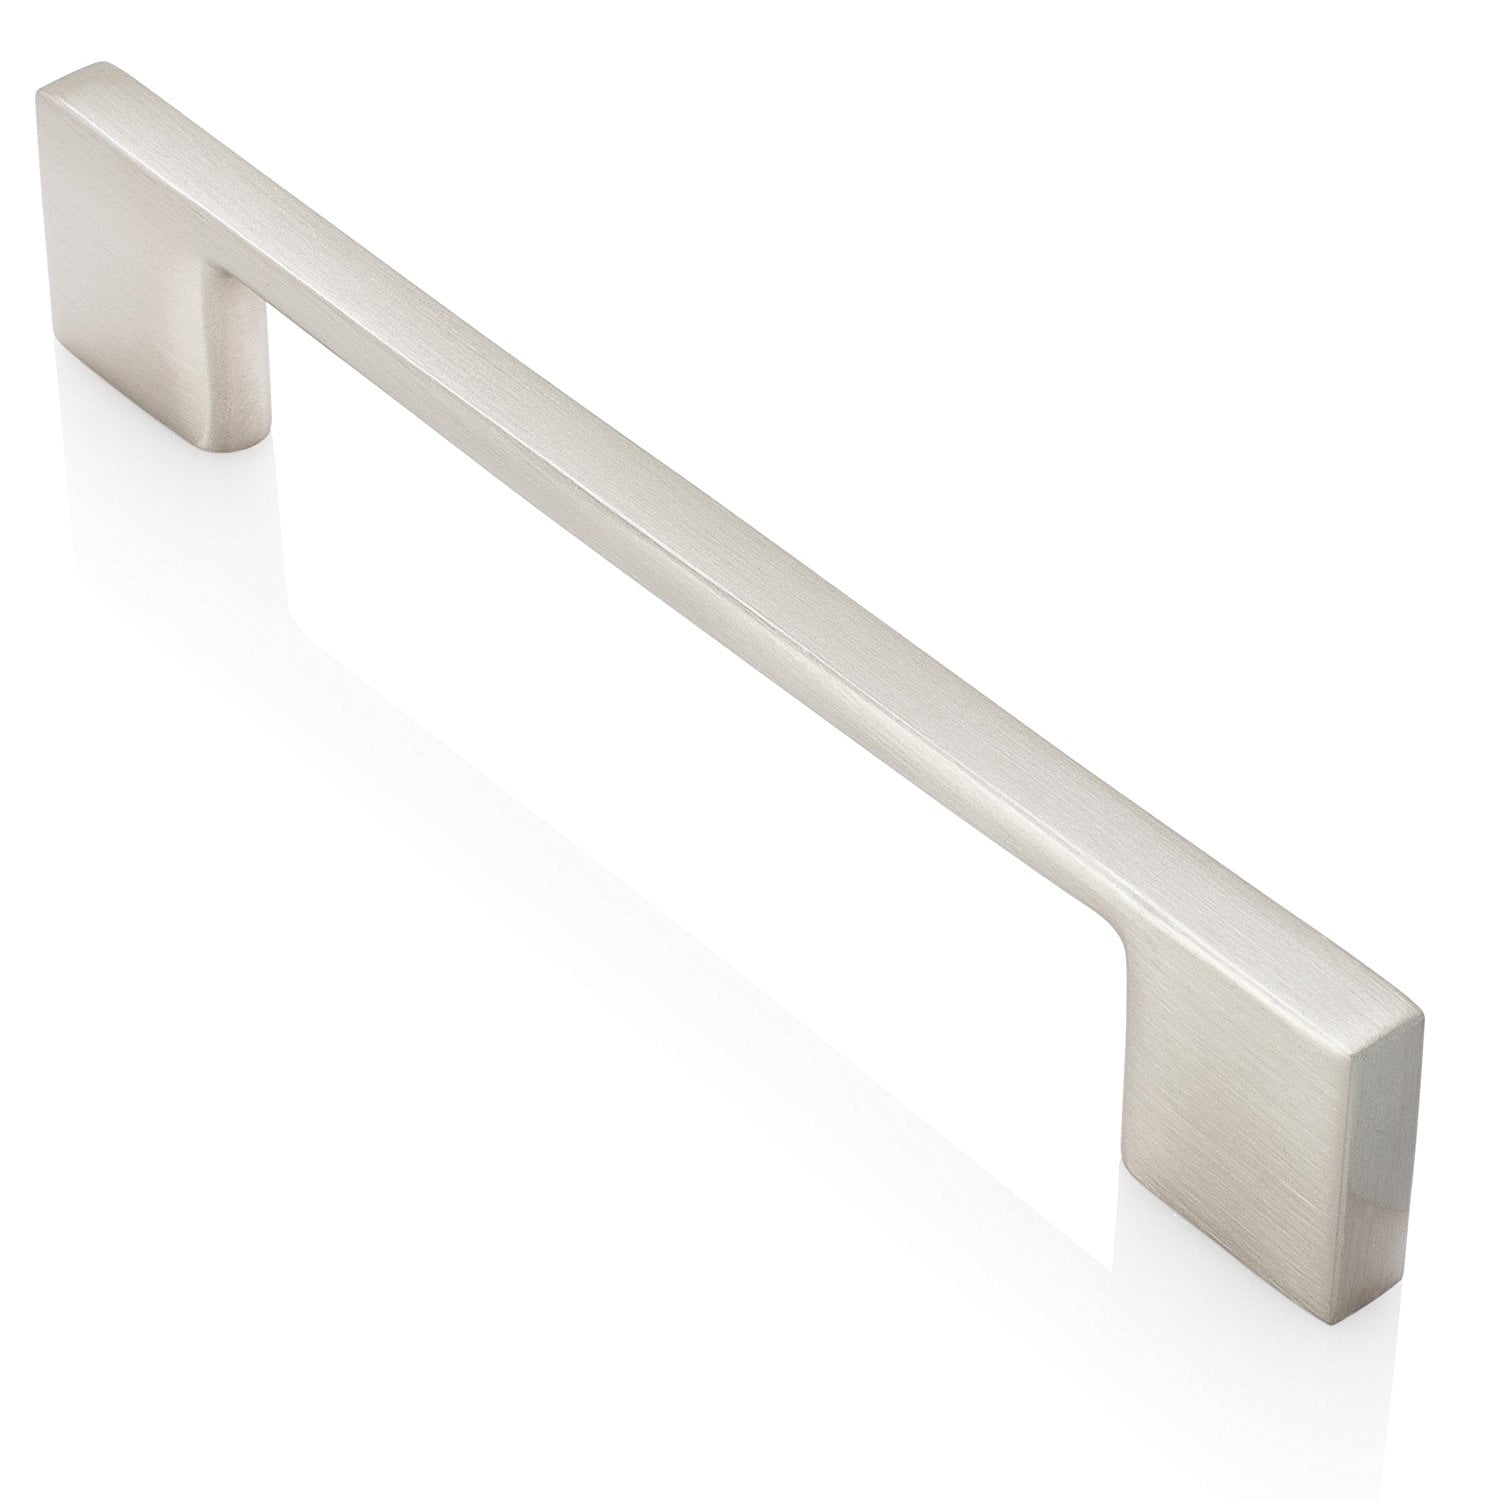 Southern Hills Brushed Nickel Cabinet Handles, 6.3 Inches ...